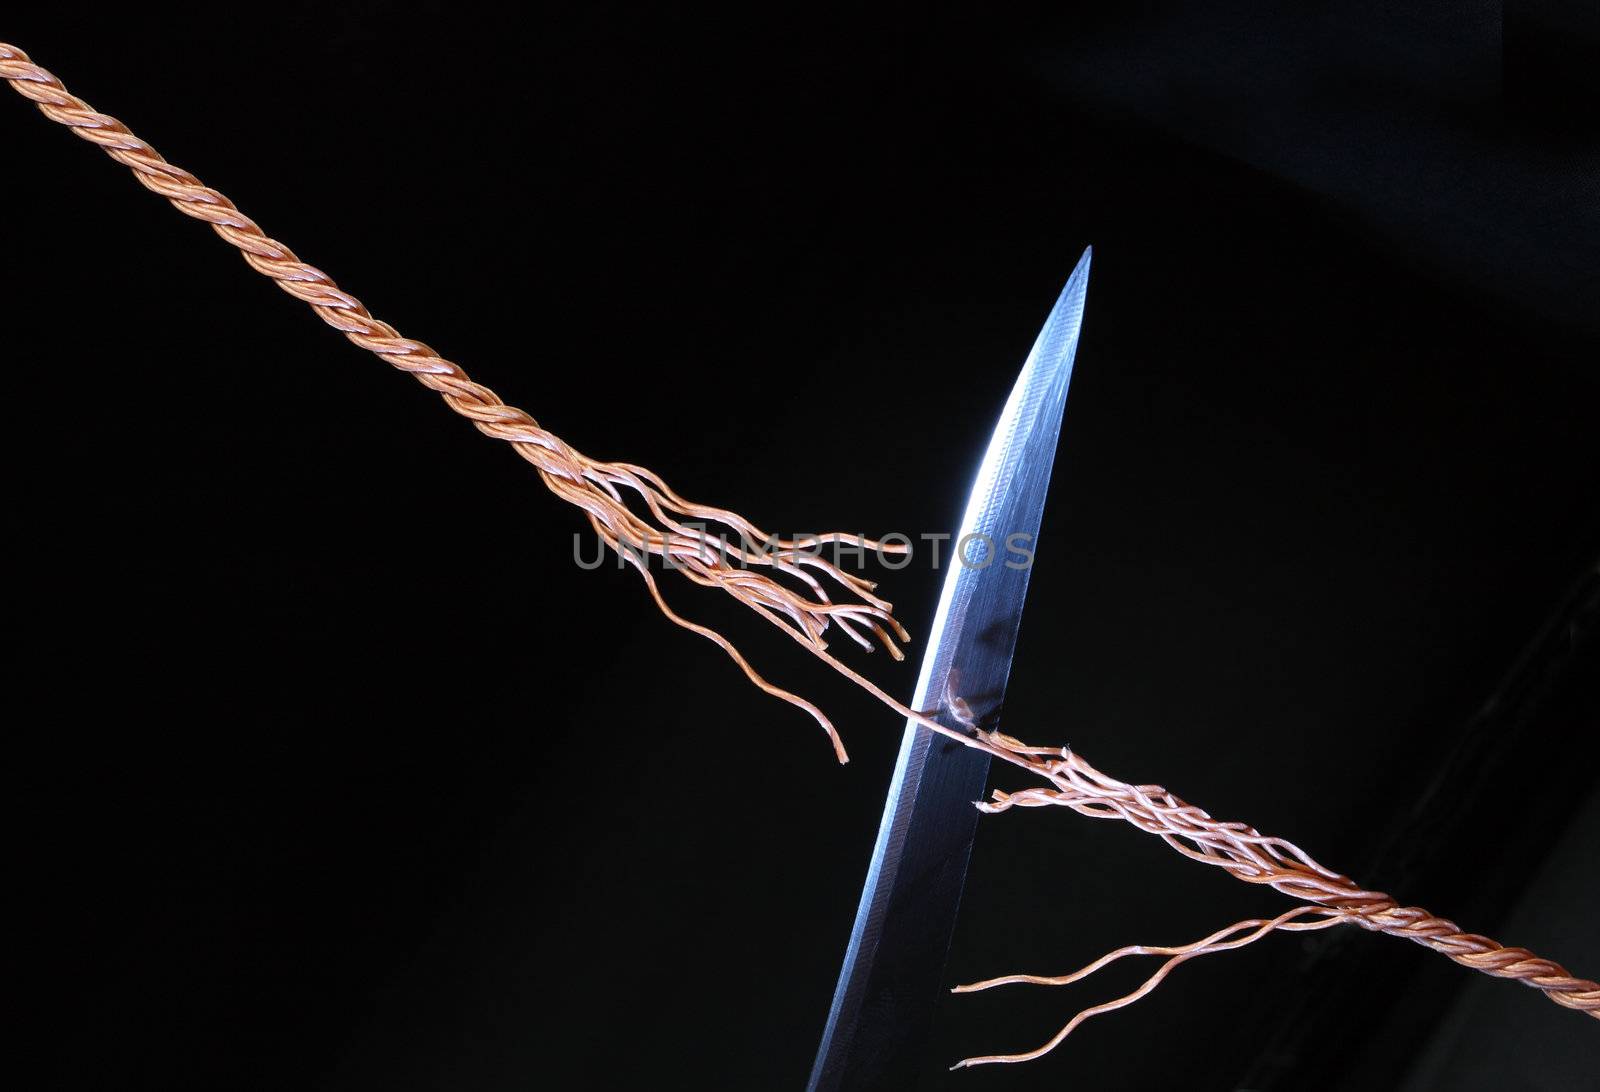 Sharp knife cutting rope on dark background with copy space